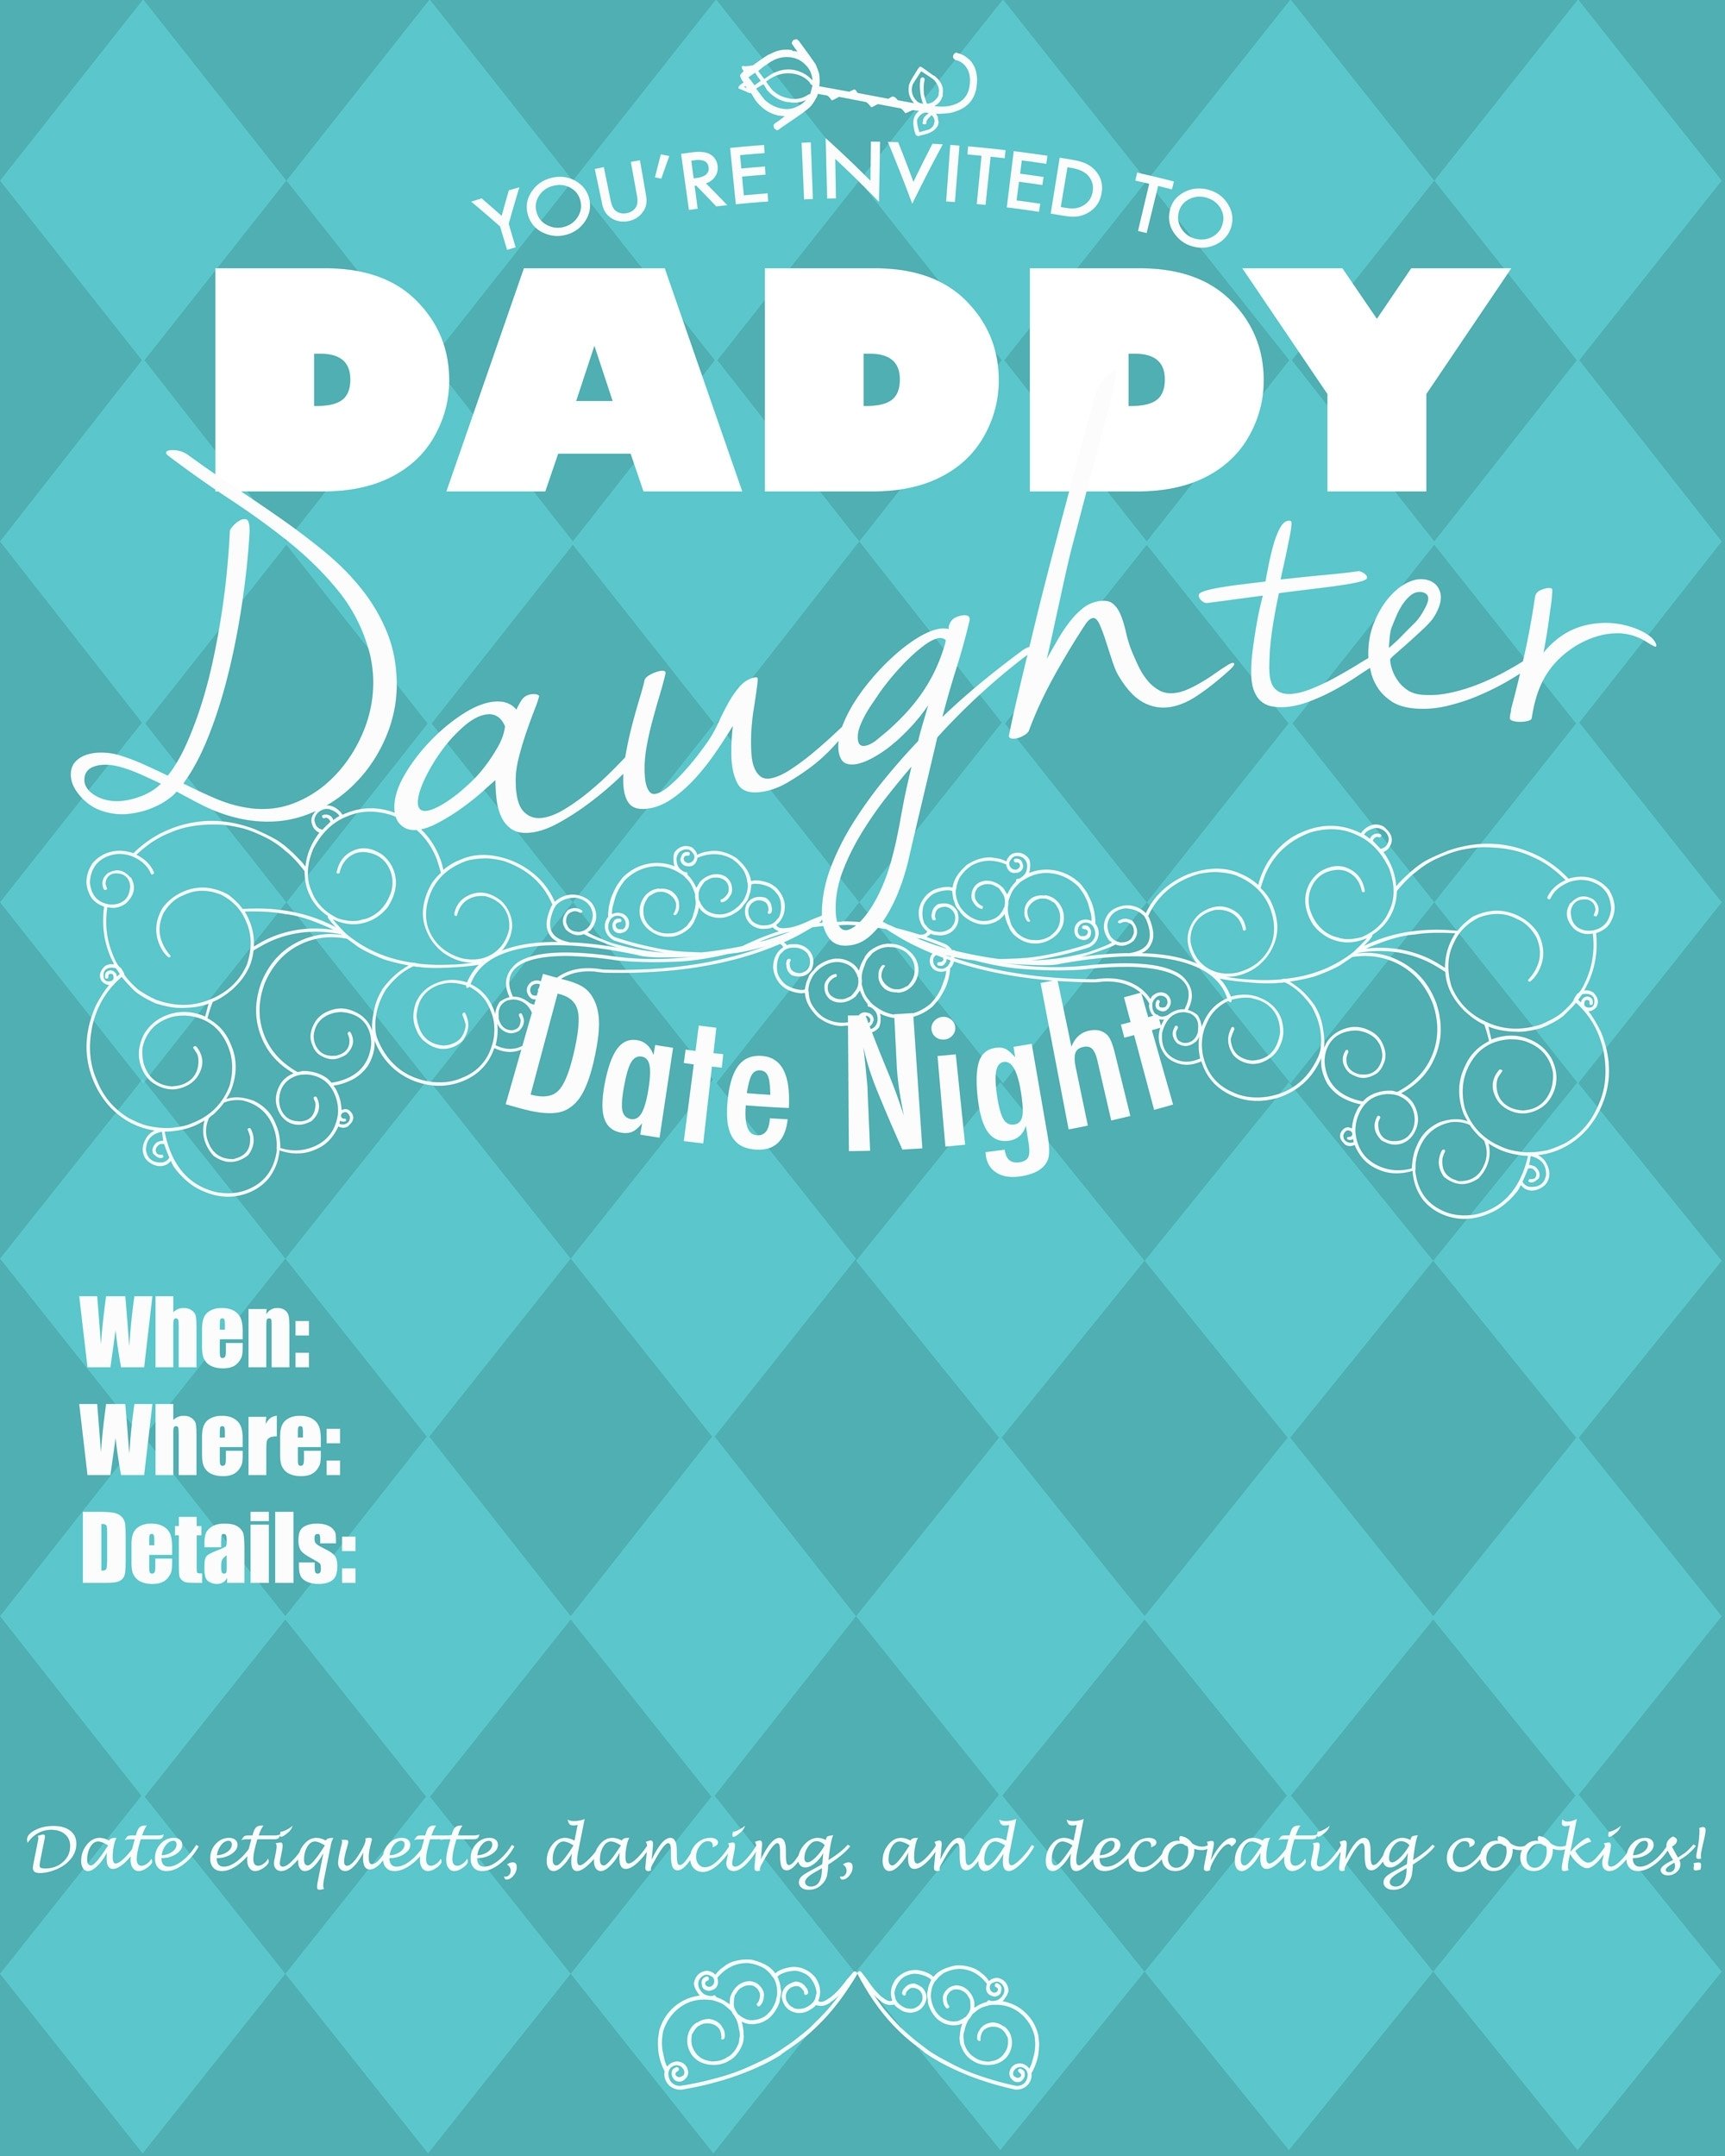 10 Beautiful Daddy Daughter Date Night Ideas blank invitation for daddy daughter date night family fun lds 2022